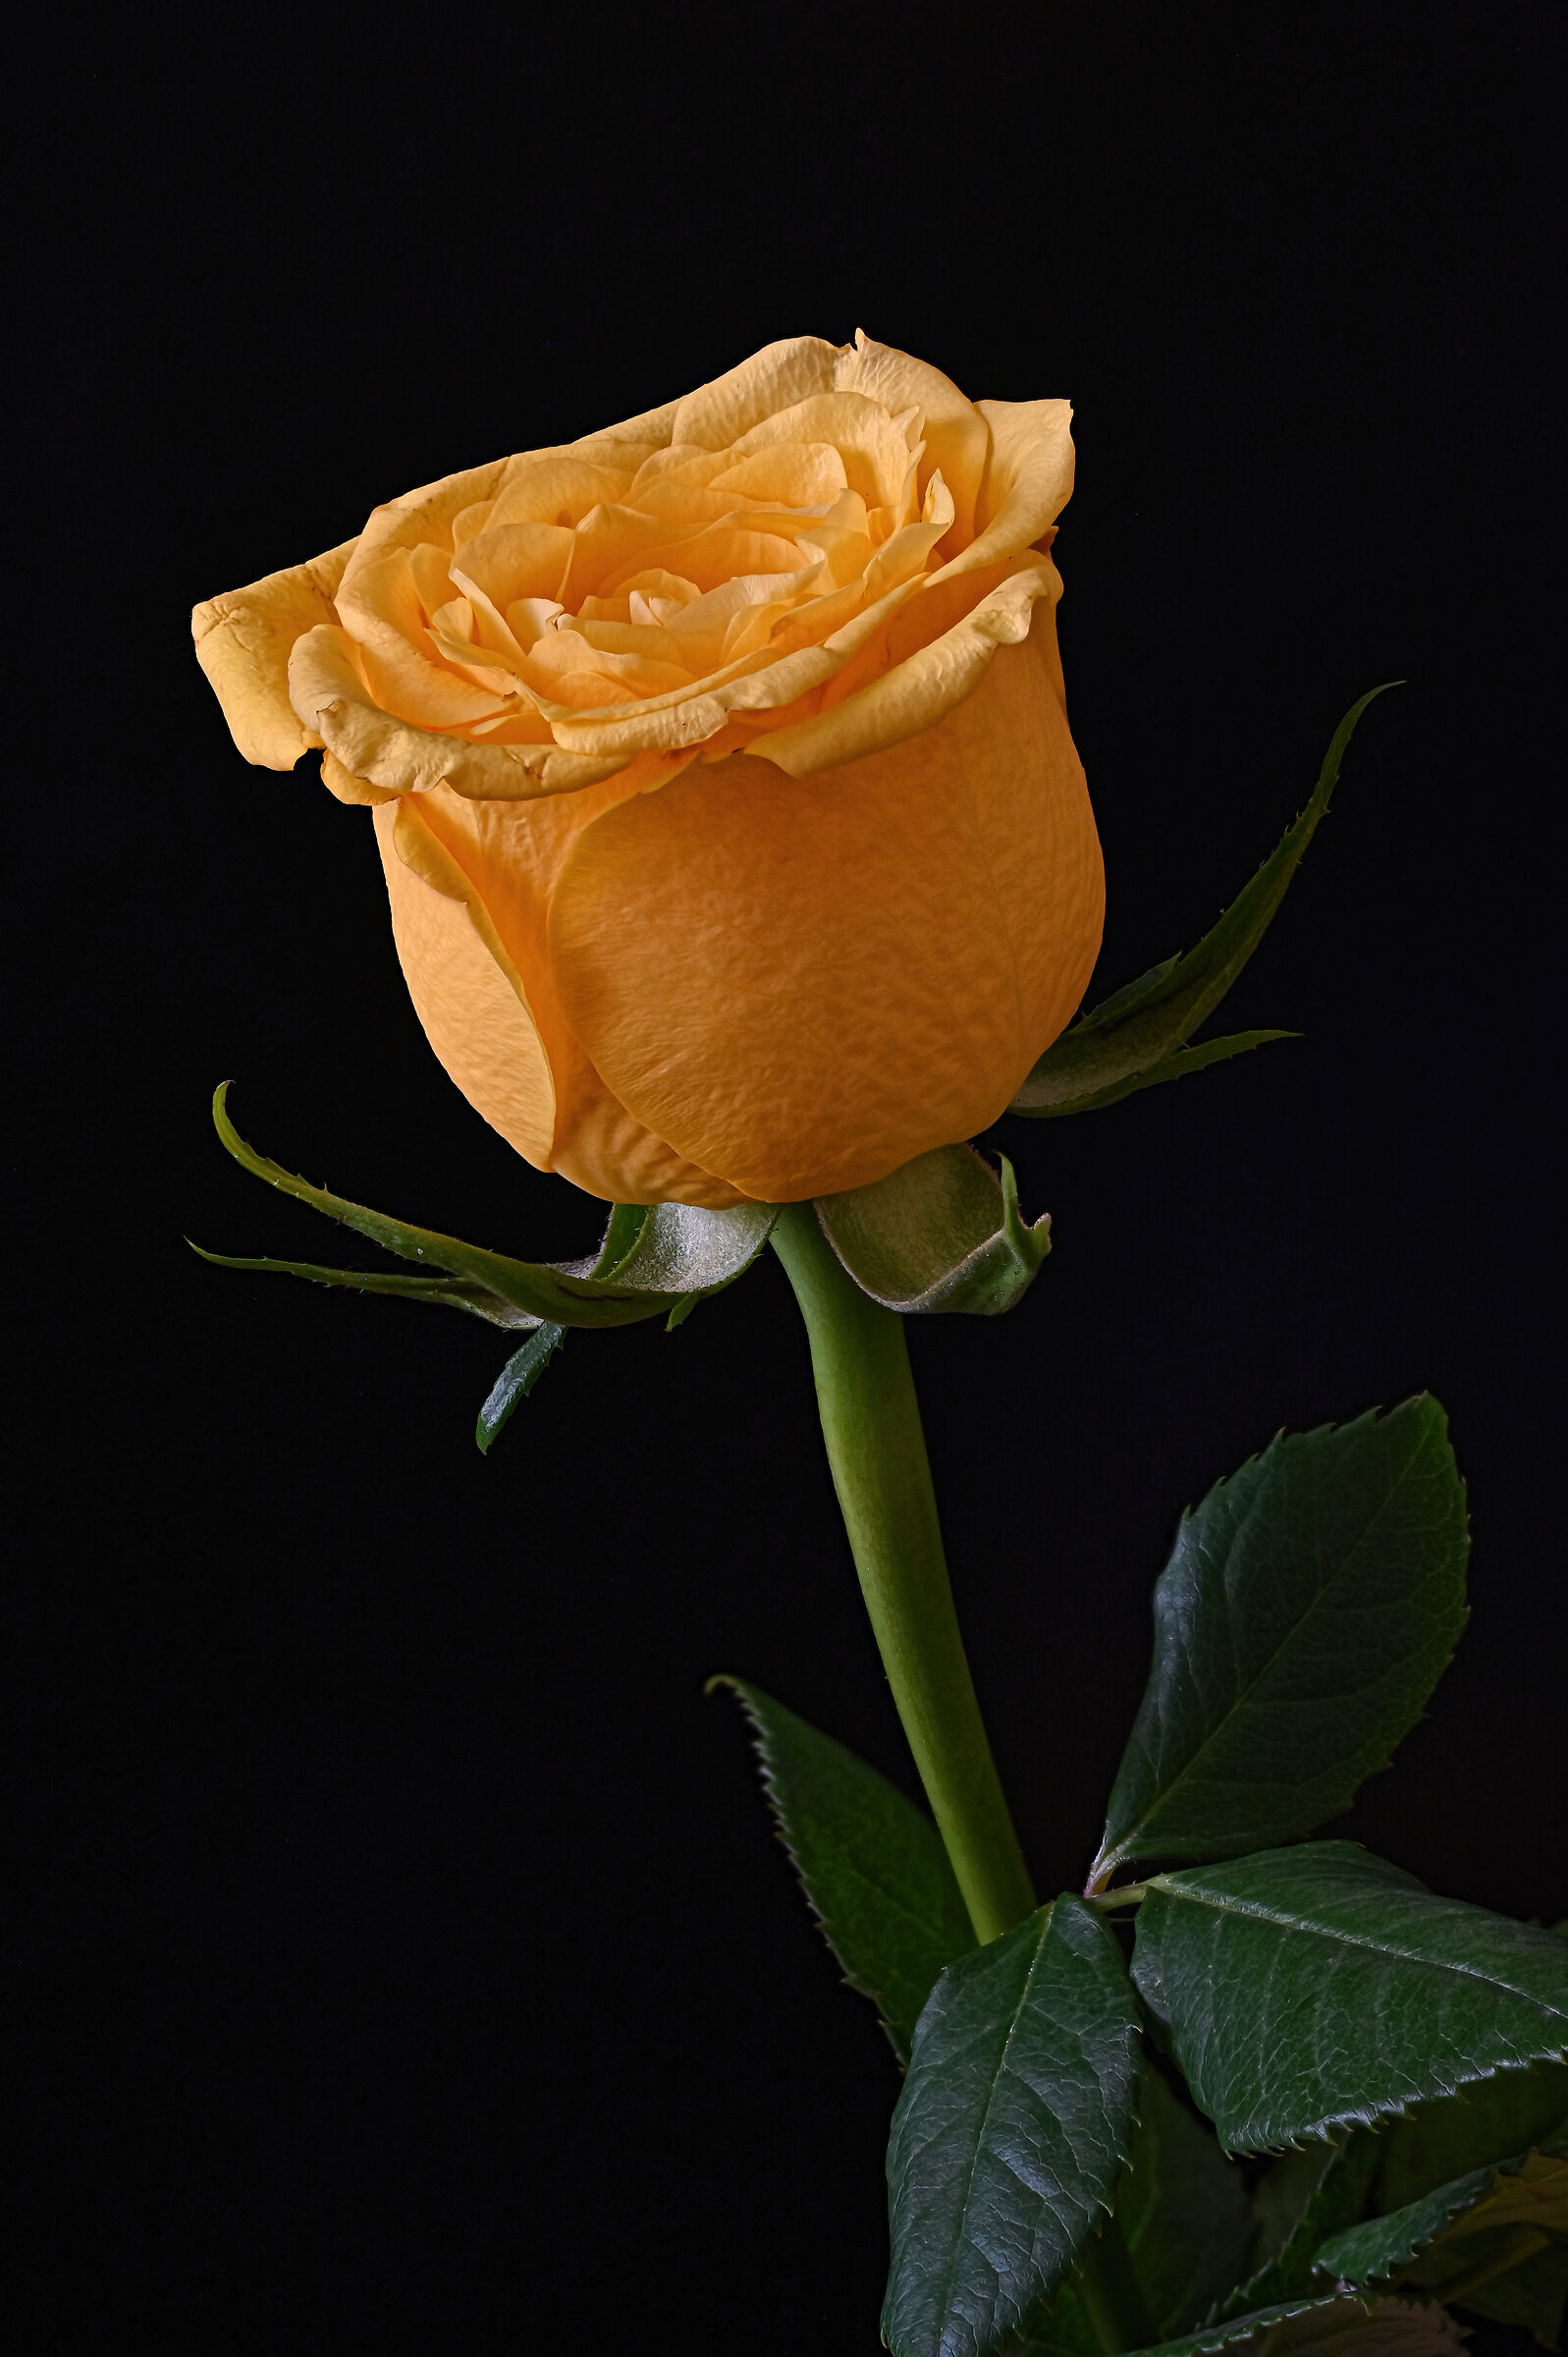 A simple yellow rose...